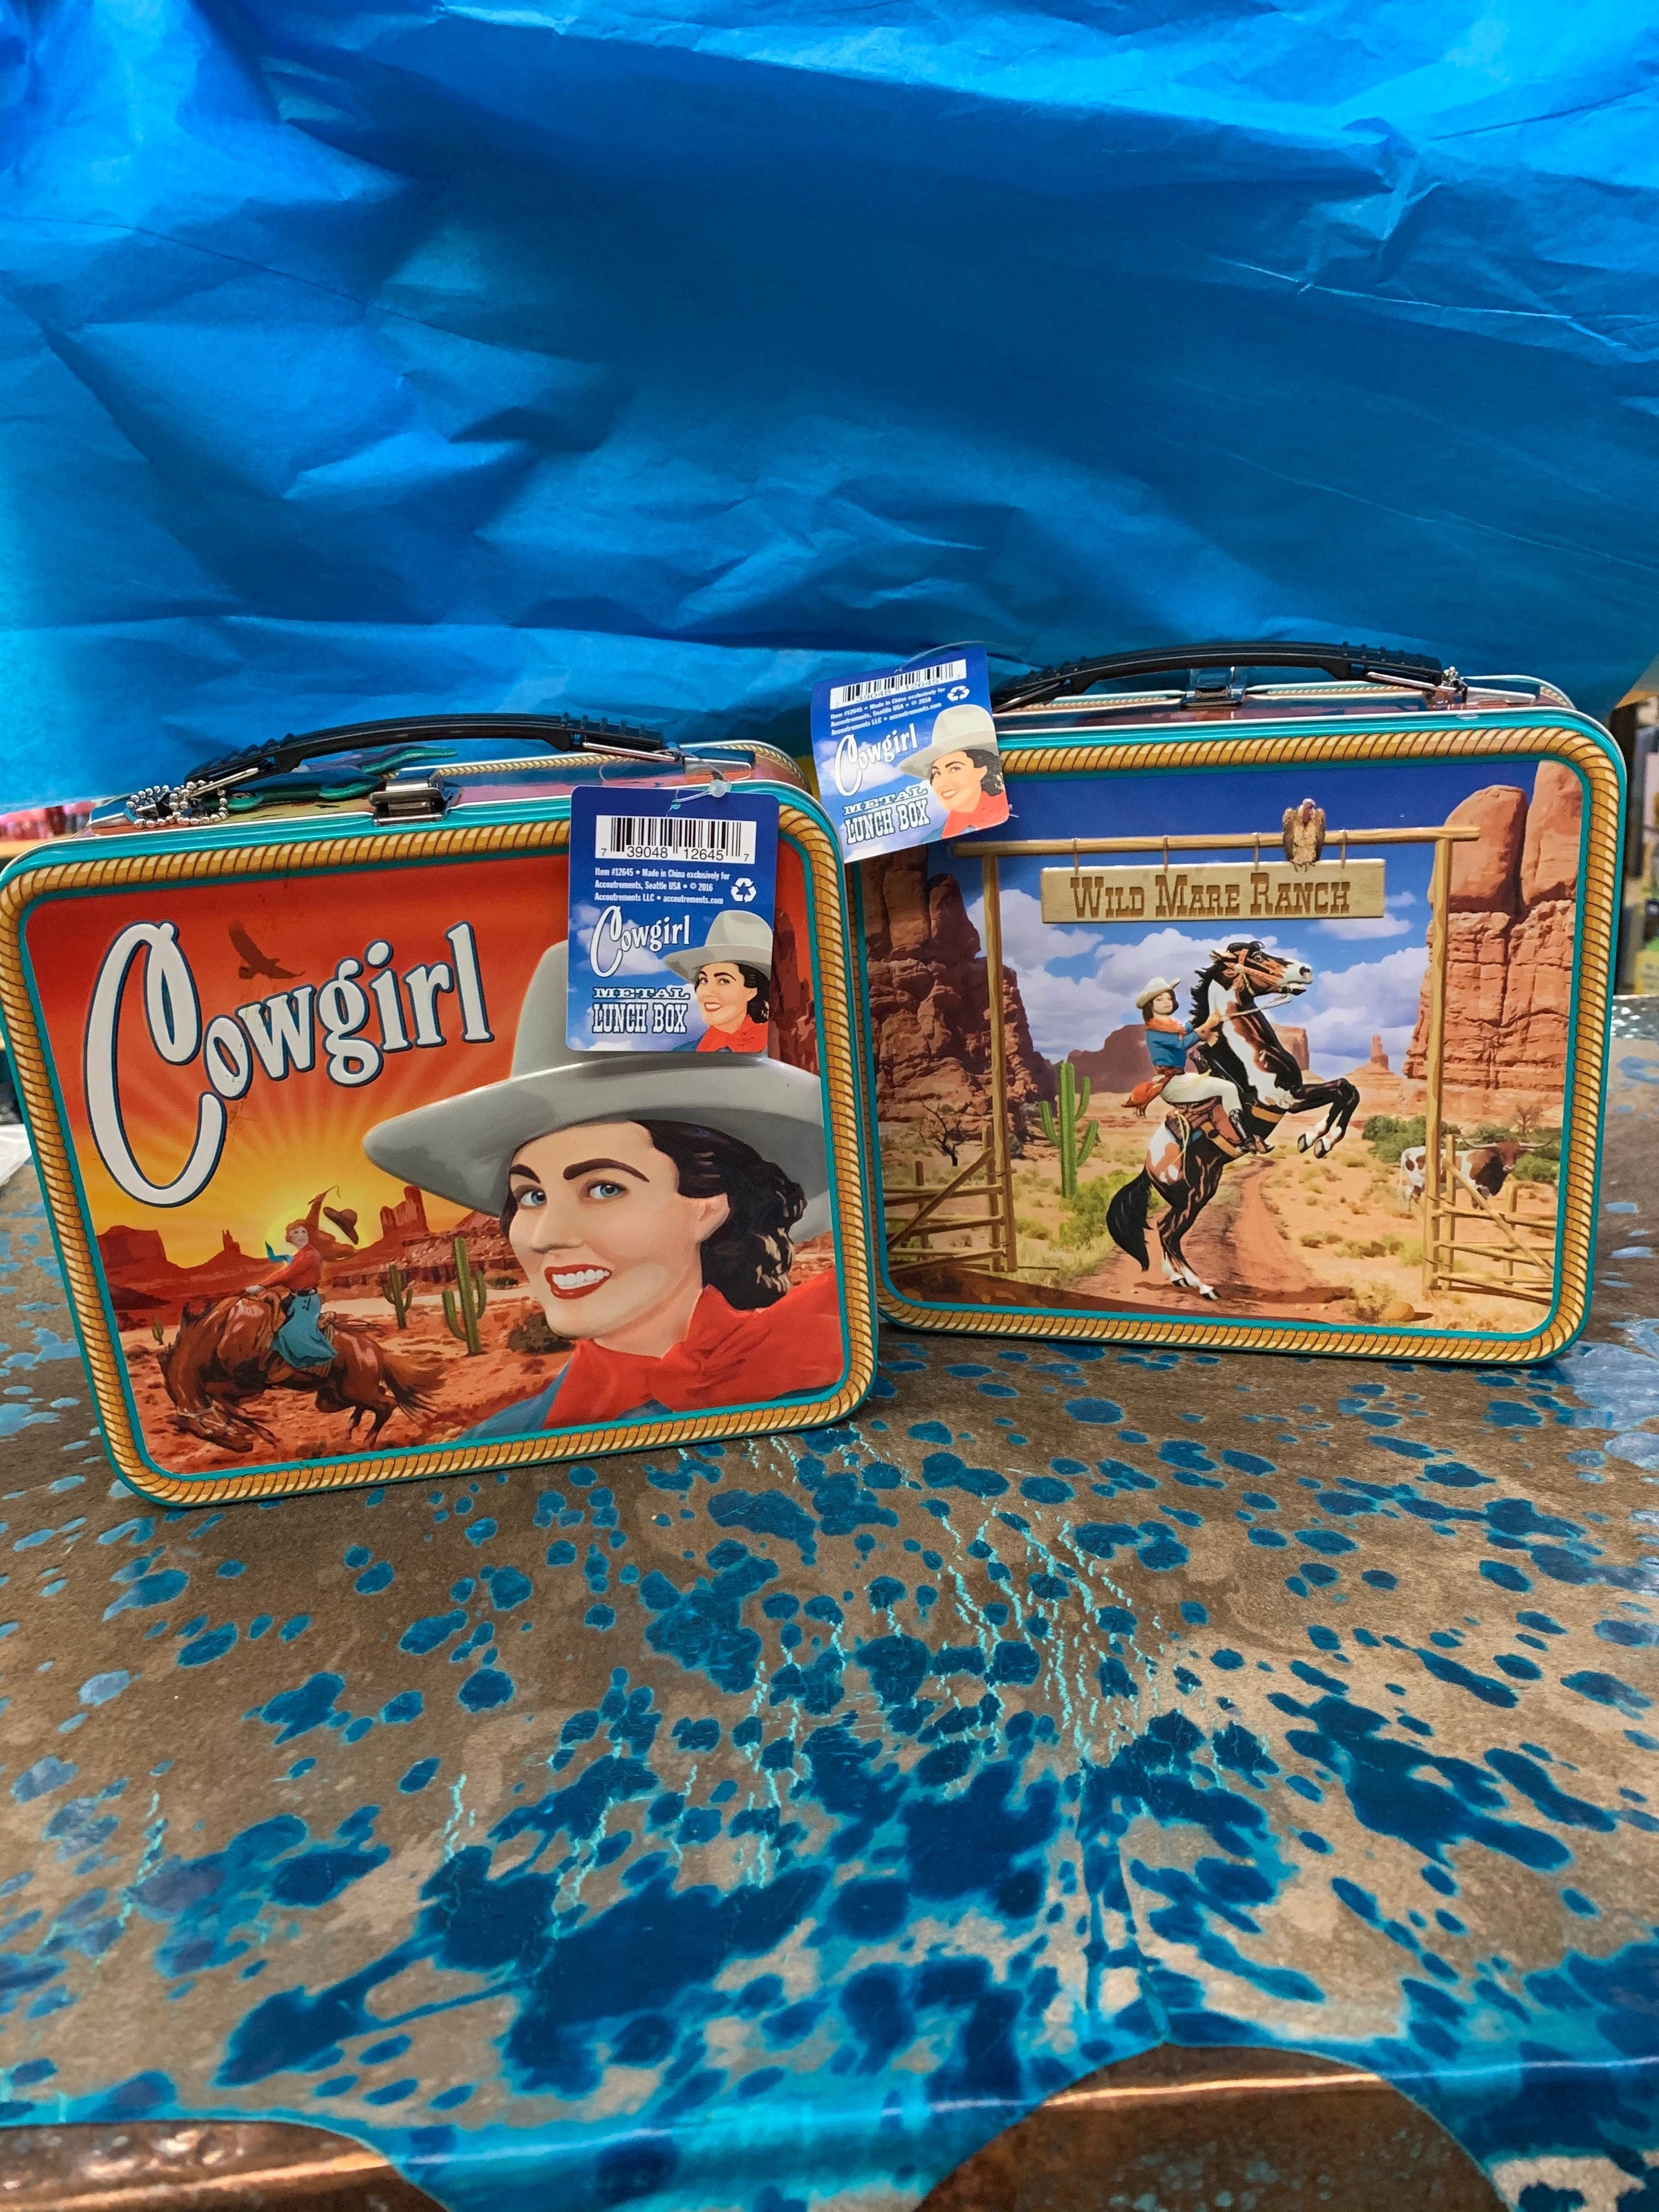 Cowgirl lunch box Southwest Bedazzle home decor